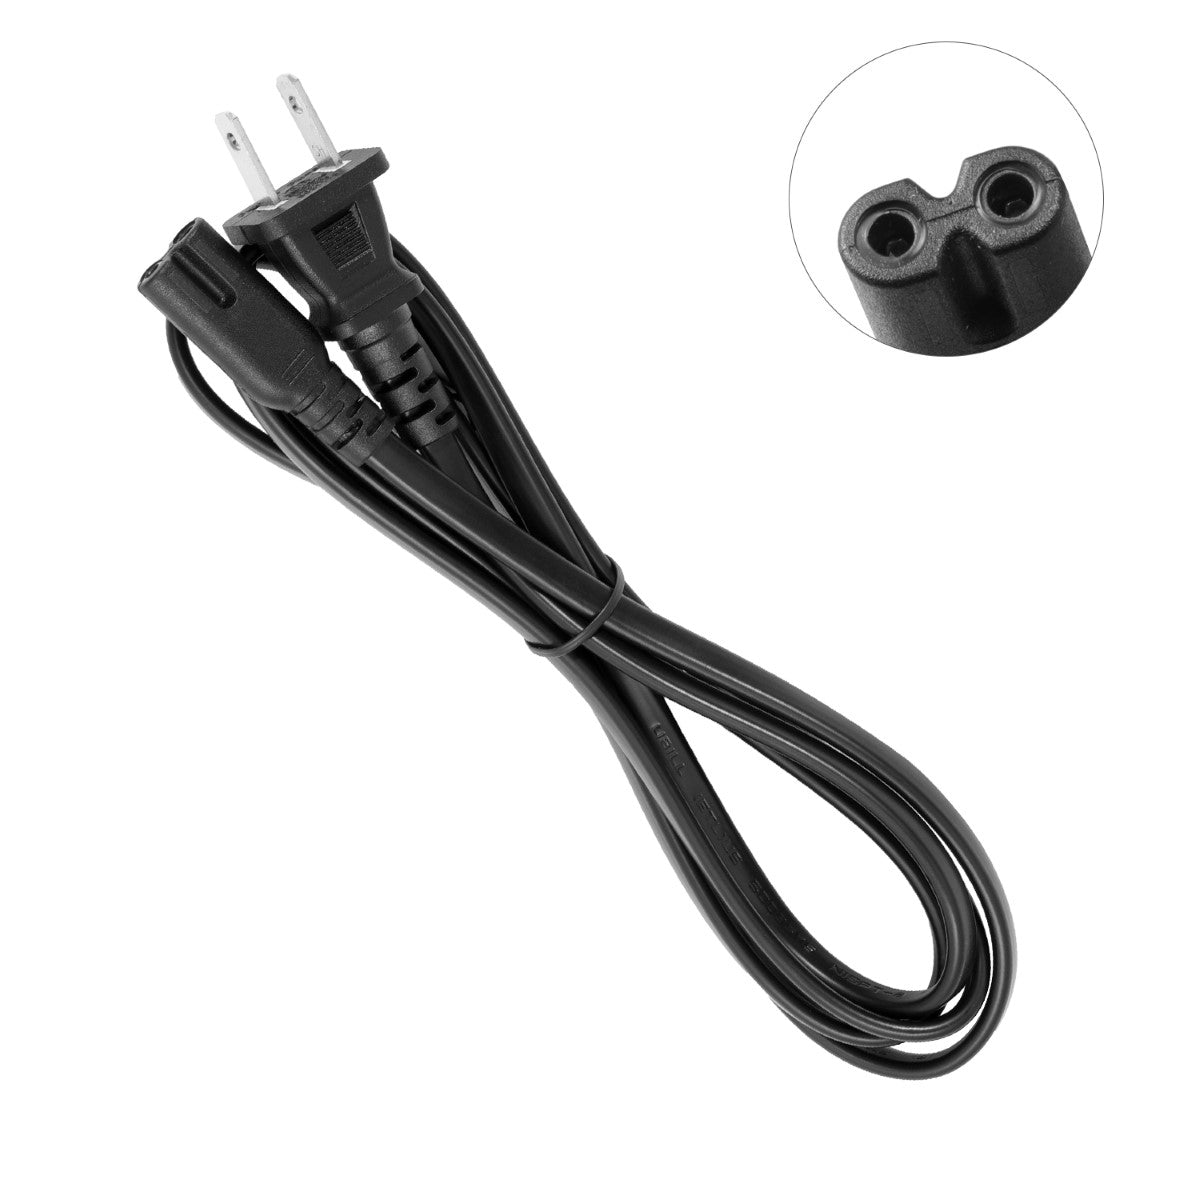 Power Cord for Samsung UE39F5570 TV.